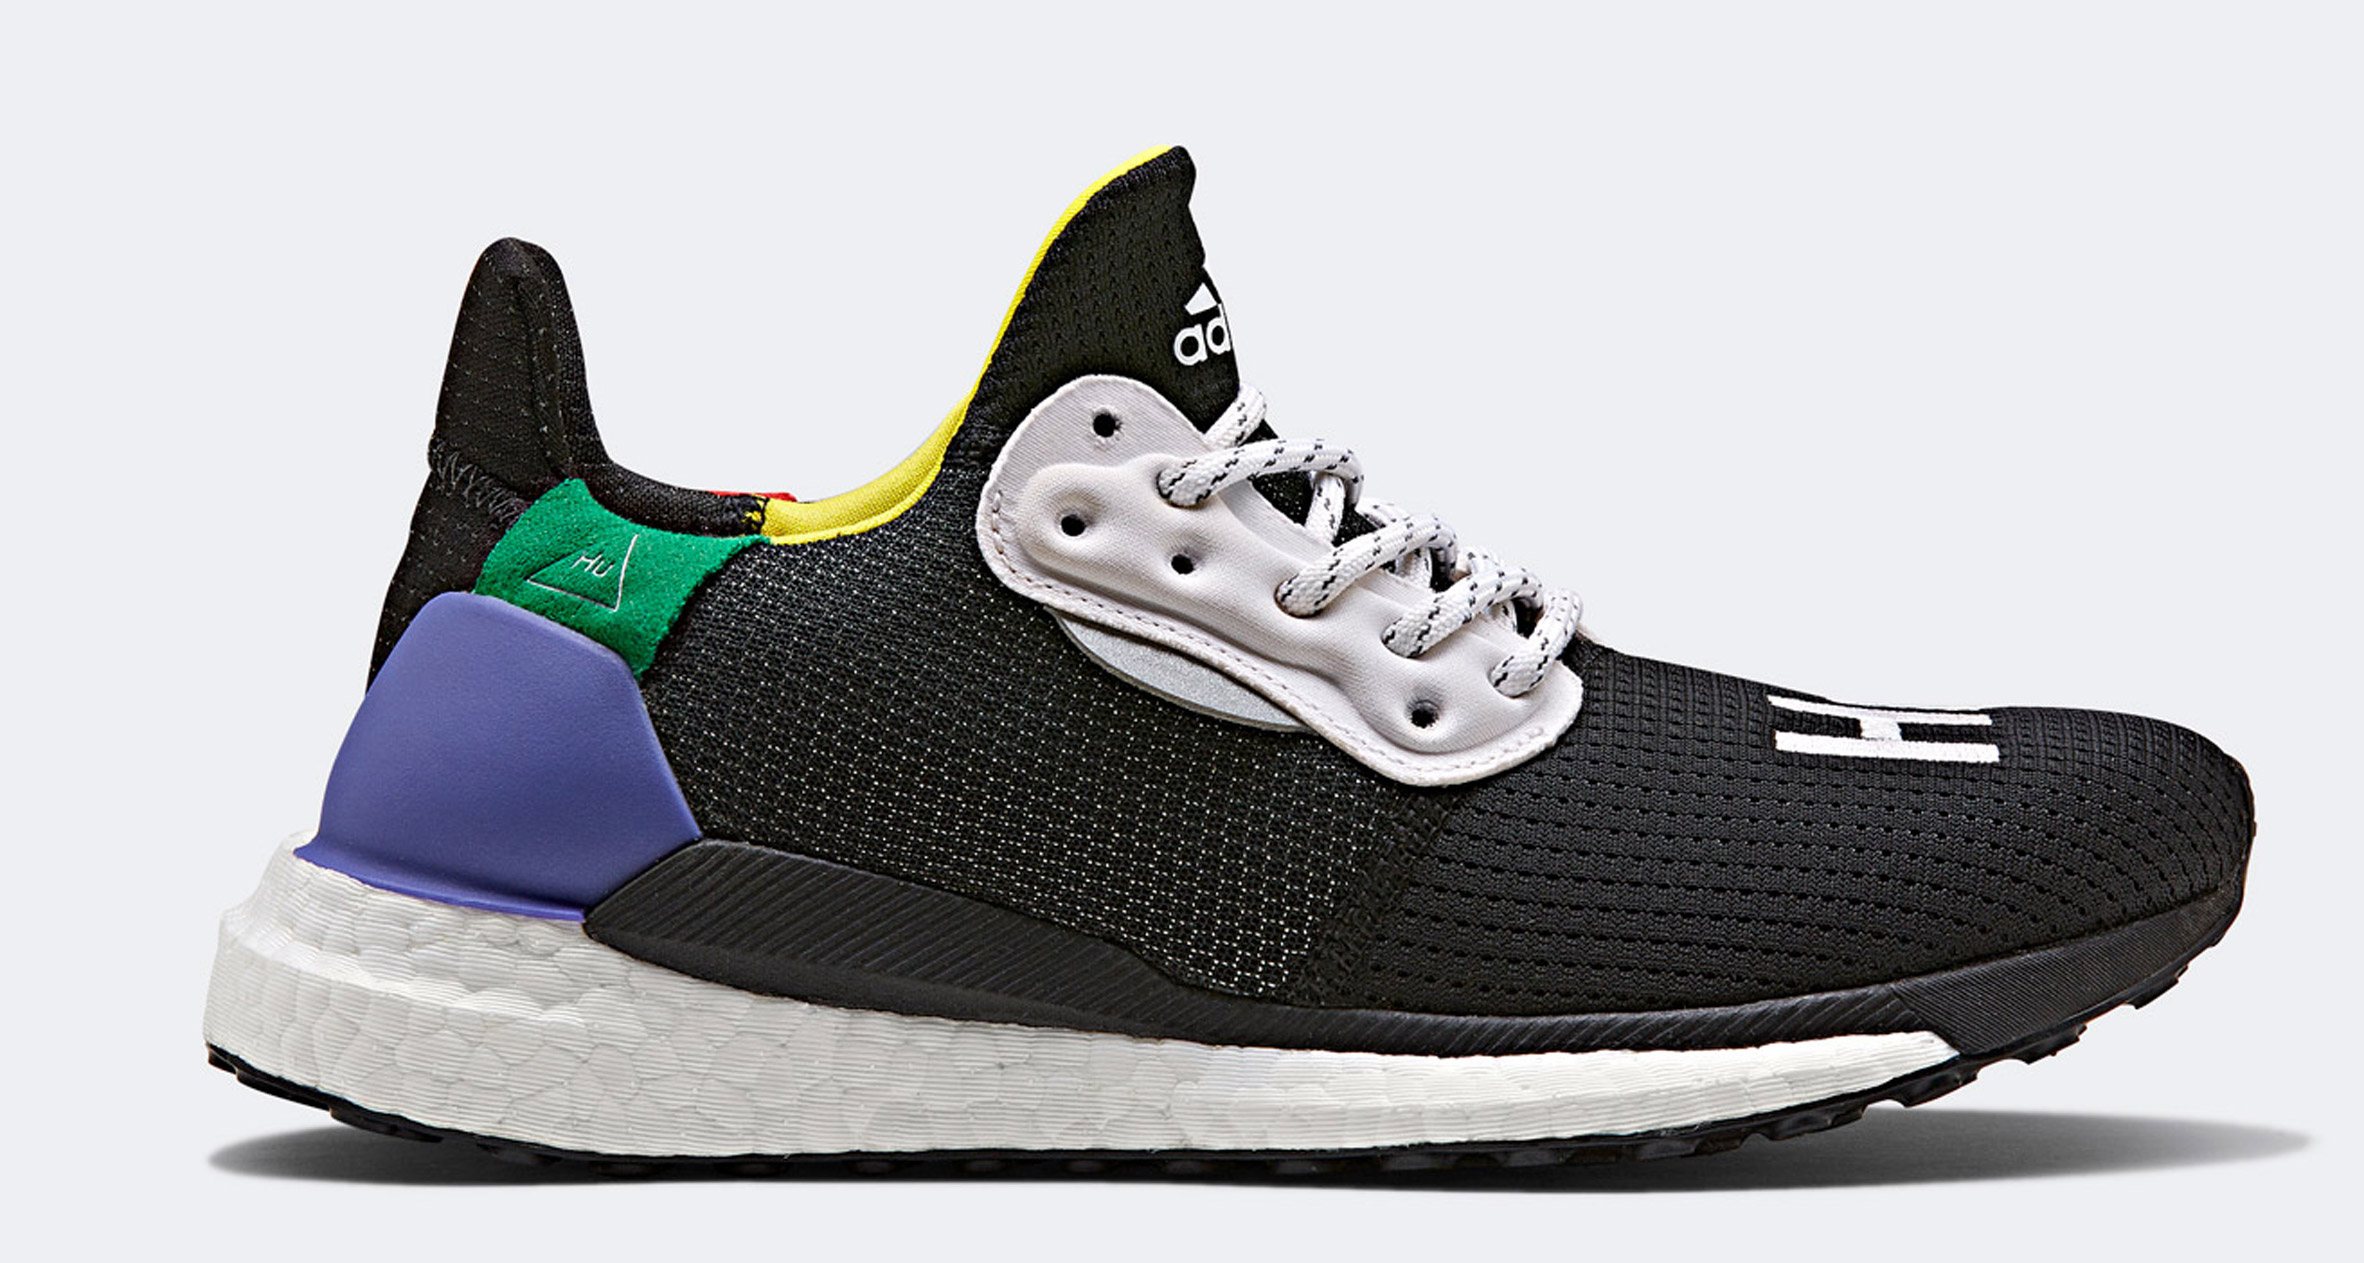 Pharrell Williams' Solar Hu adidas collection is based on East African flags